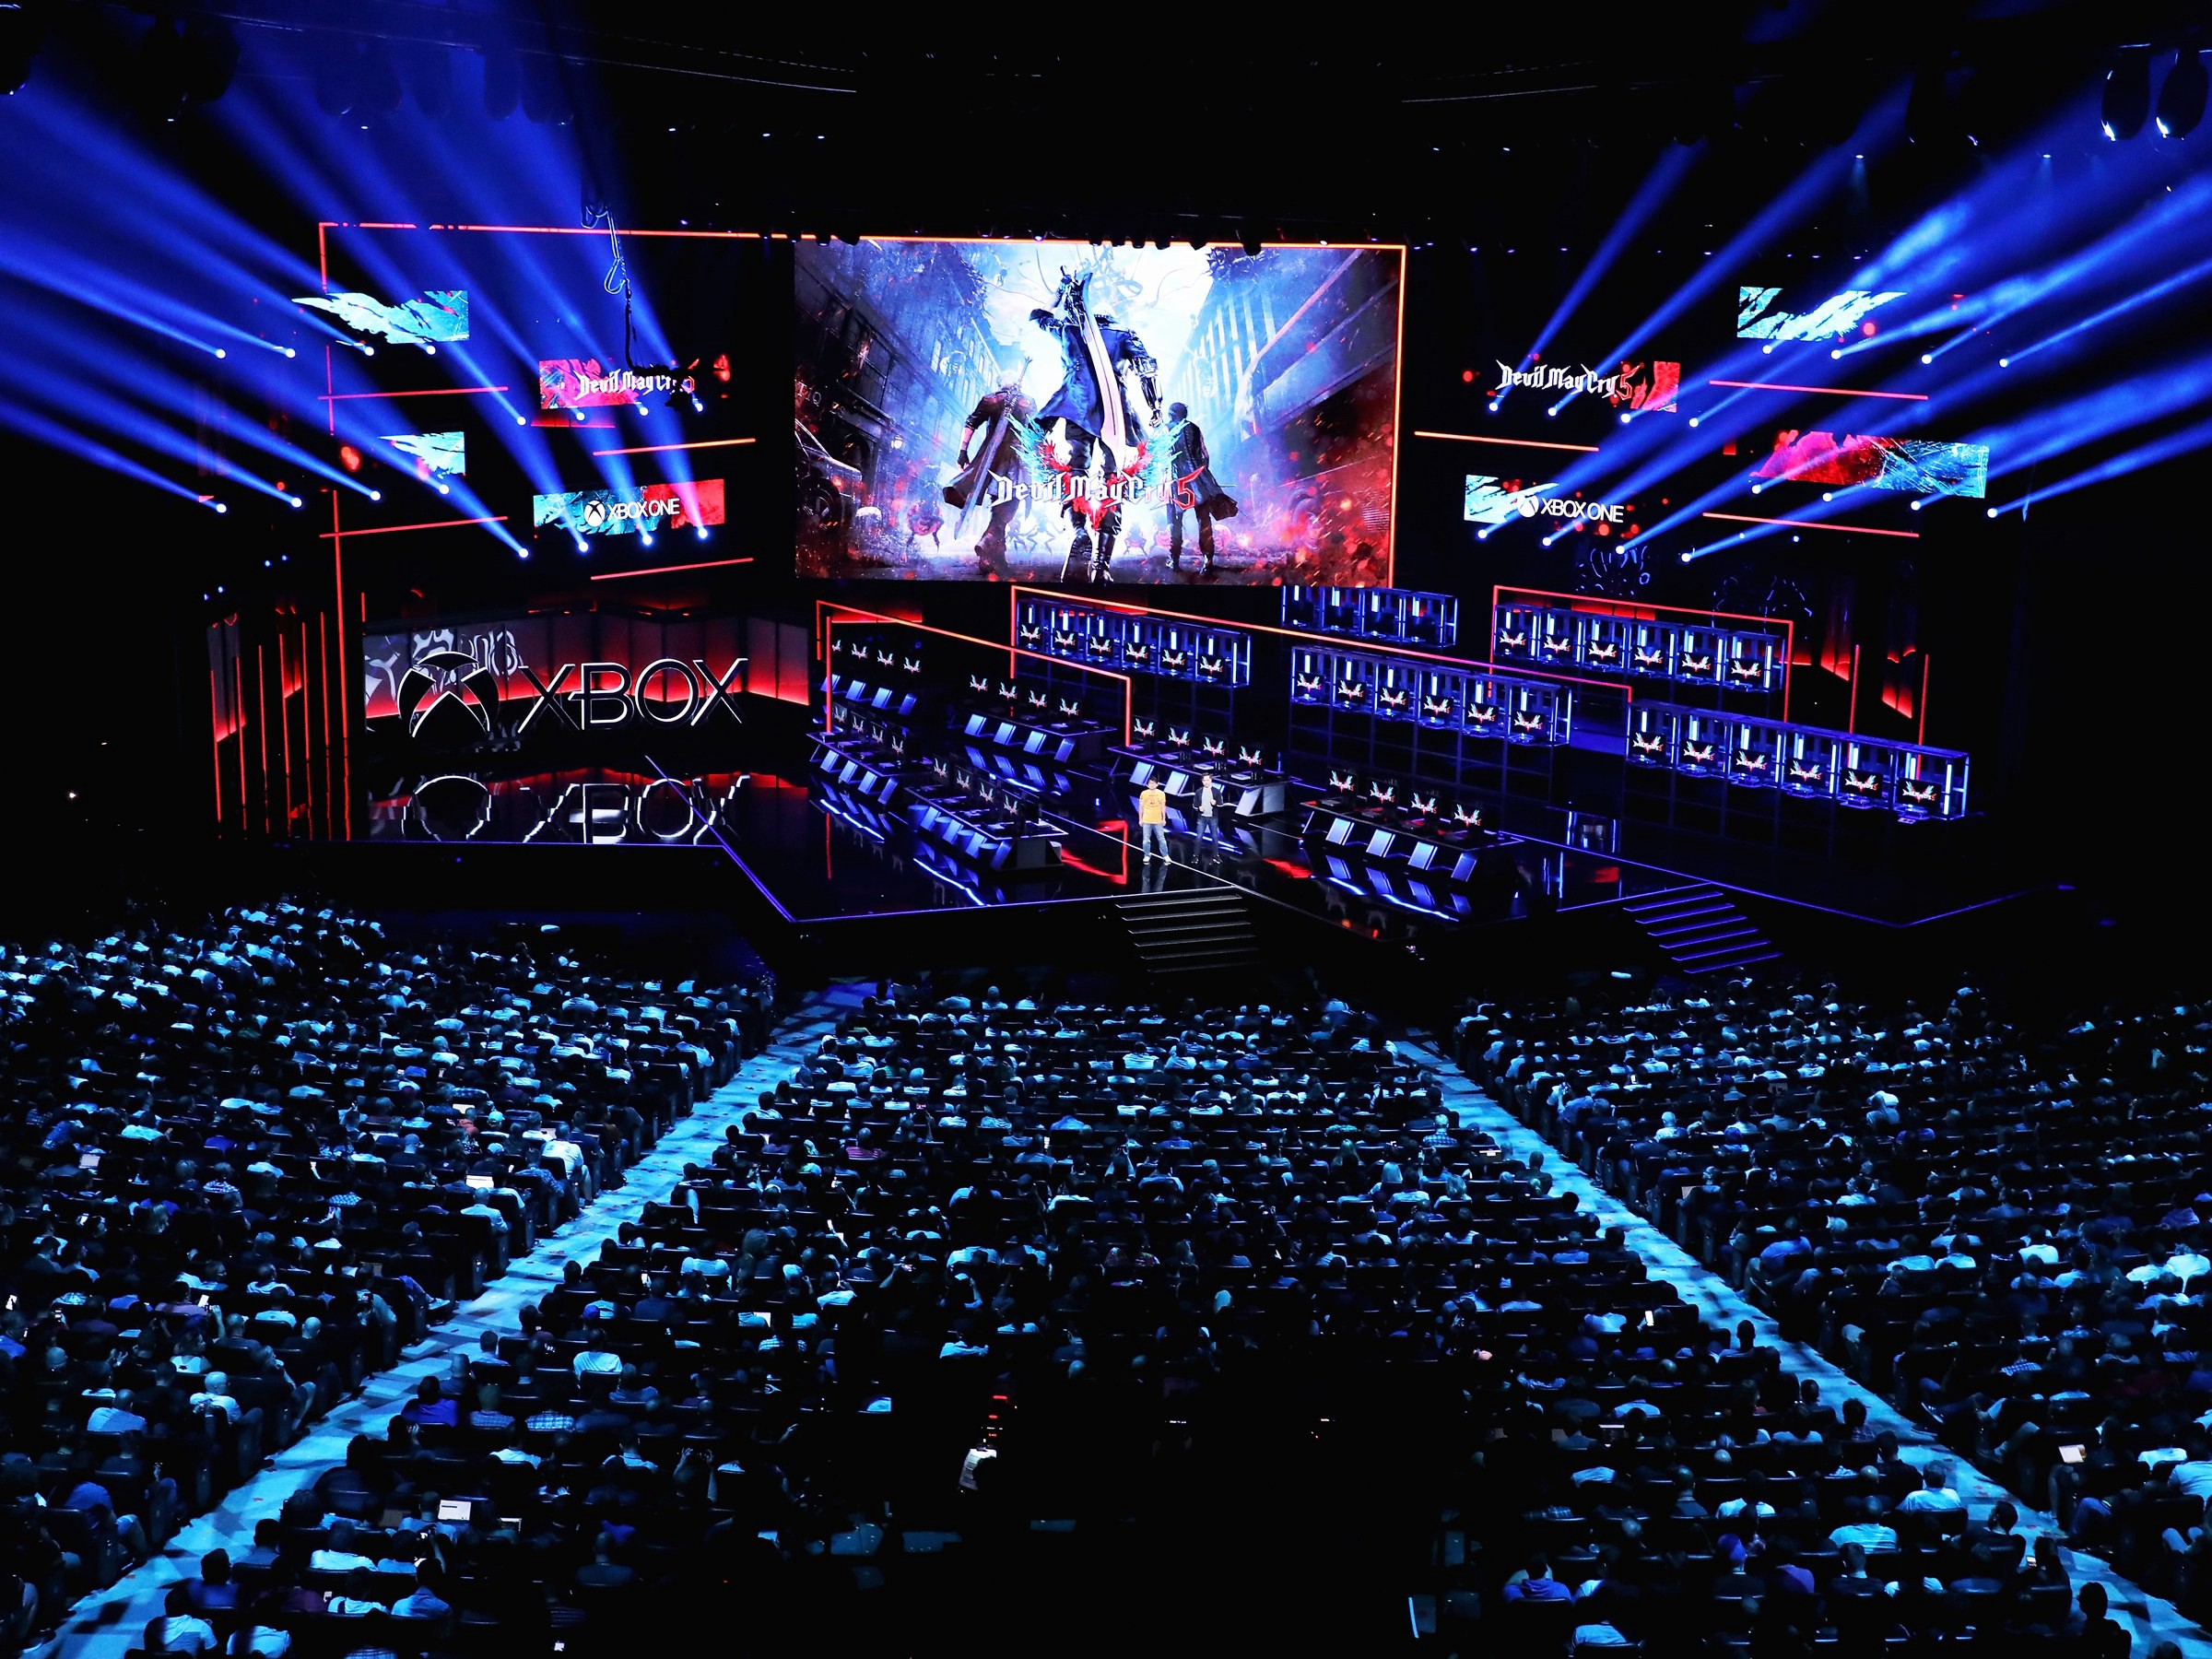 E3 2022 won't happen in-person, organisers excited about the possibilities  of an online event